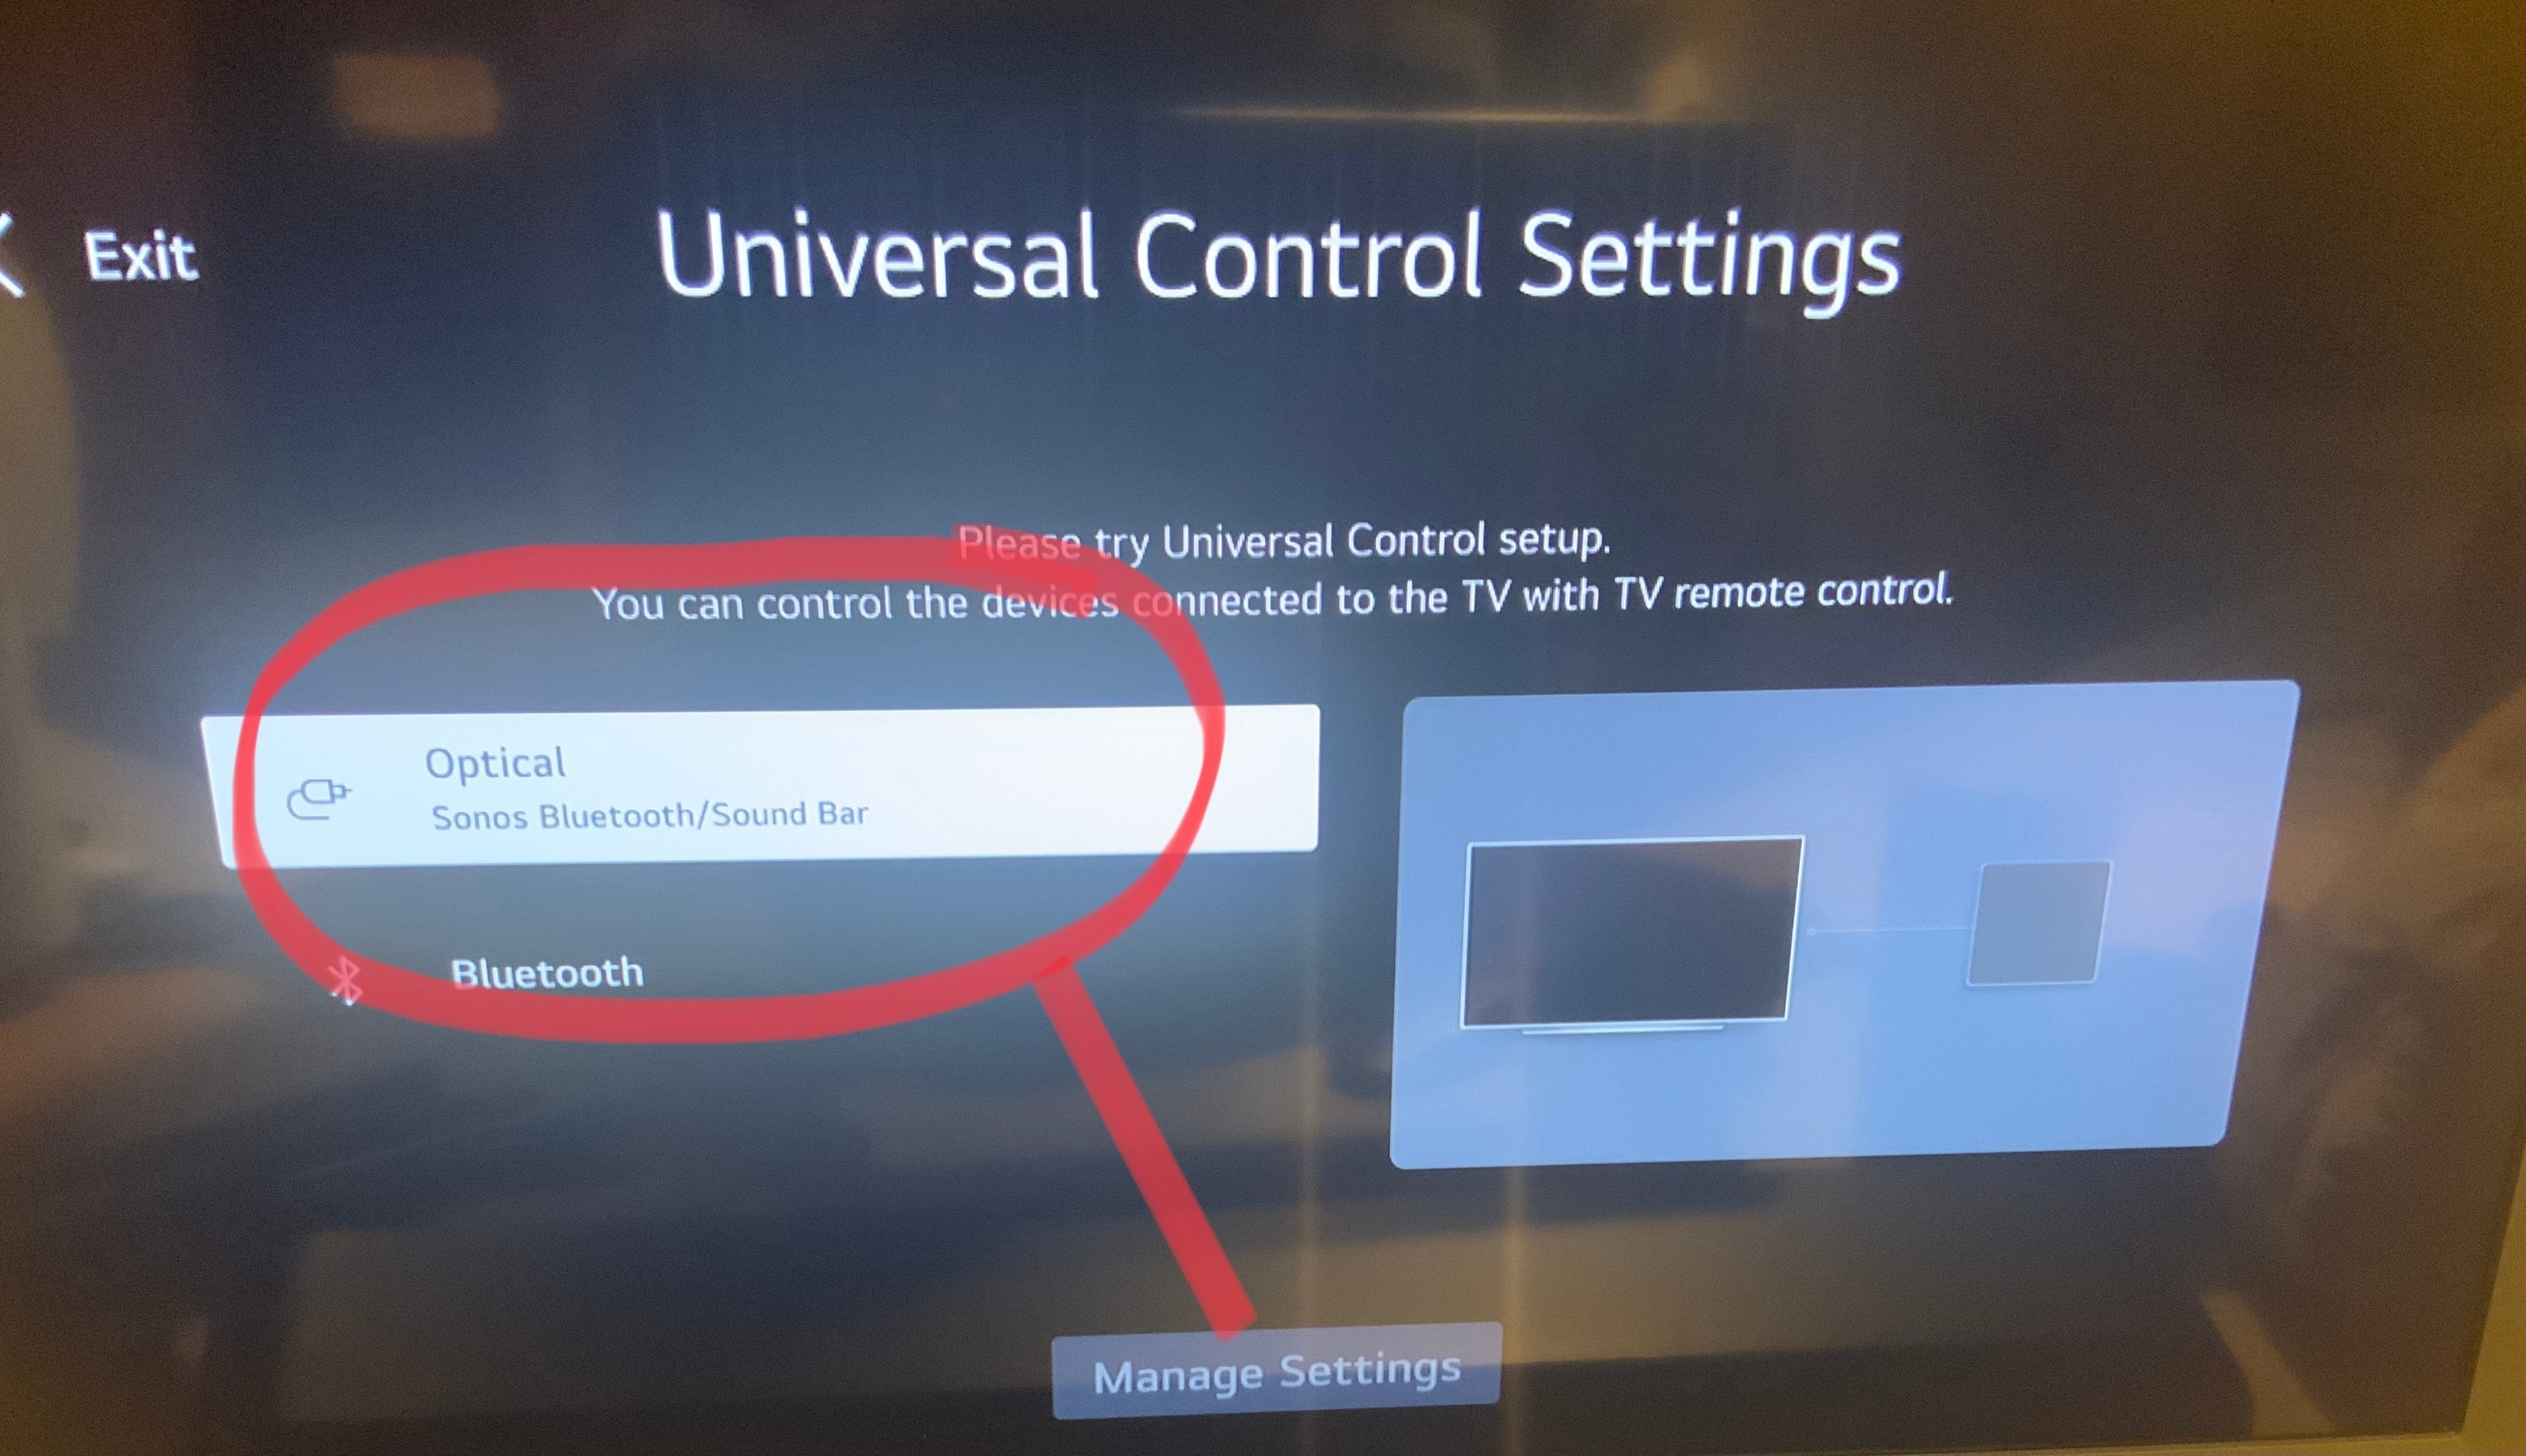 Can't get LG Magic Remote control to Playbase | Community